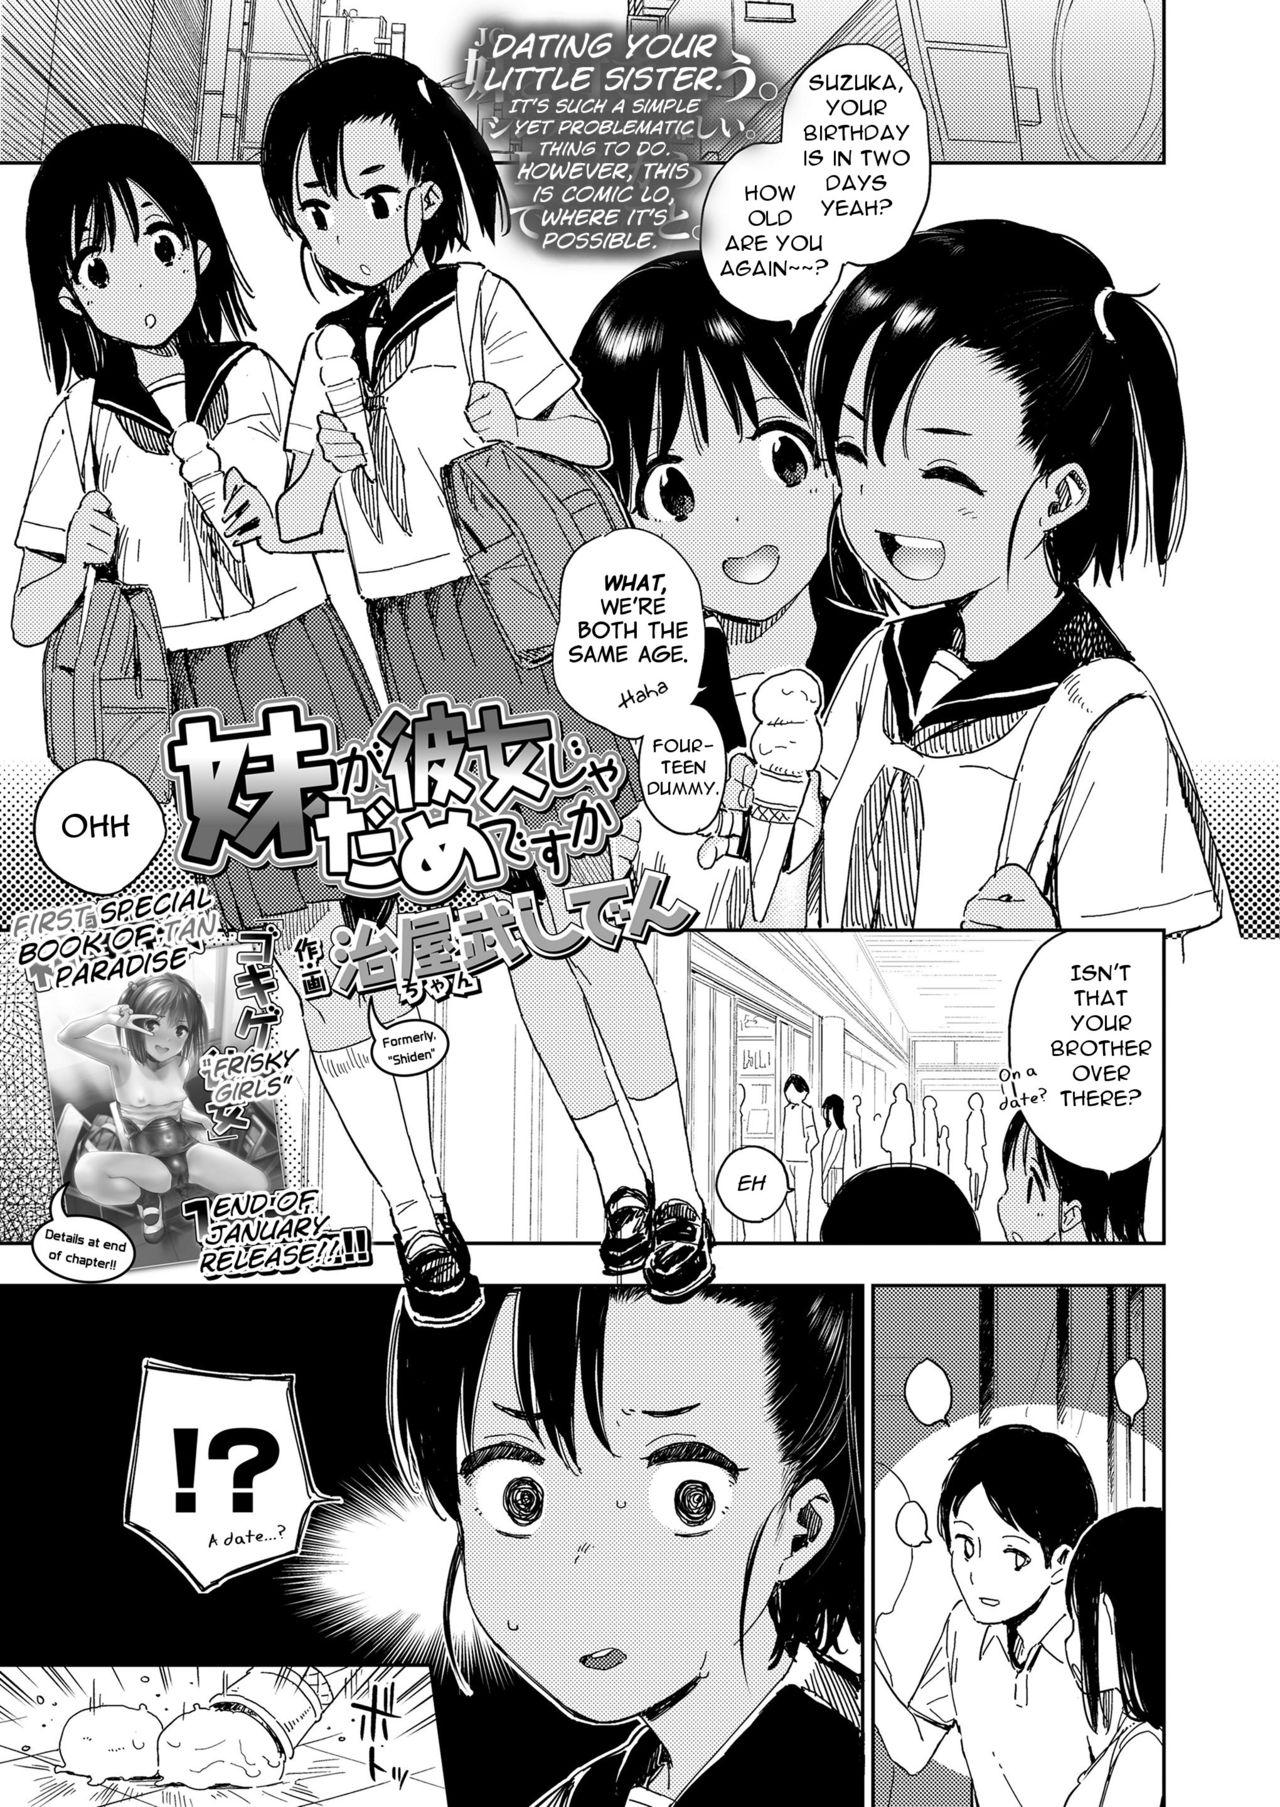 Chacal Can't My Little Sister Be My Girlfriend? Role Play - Page 1